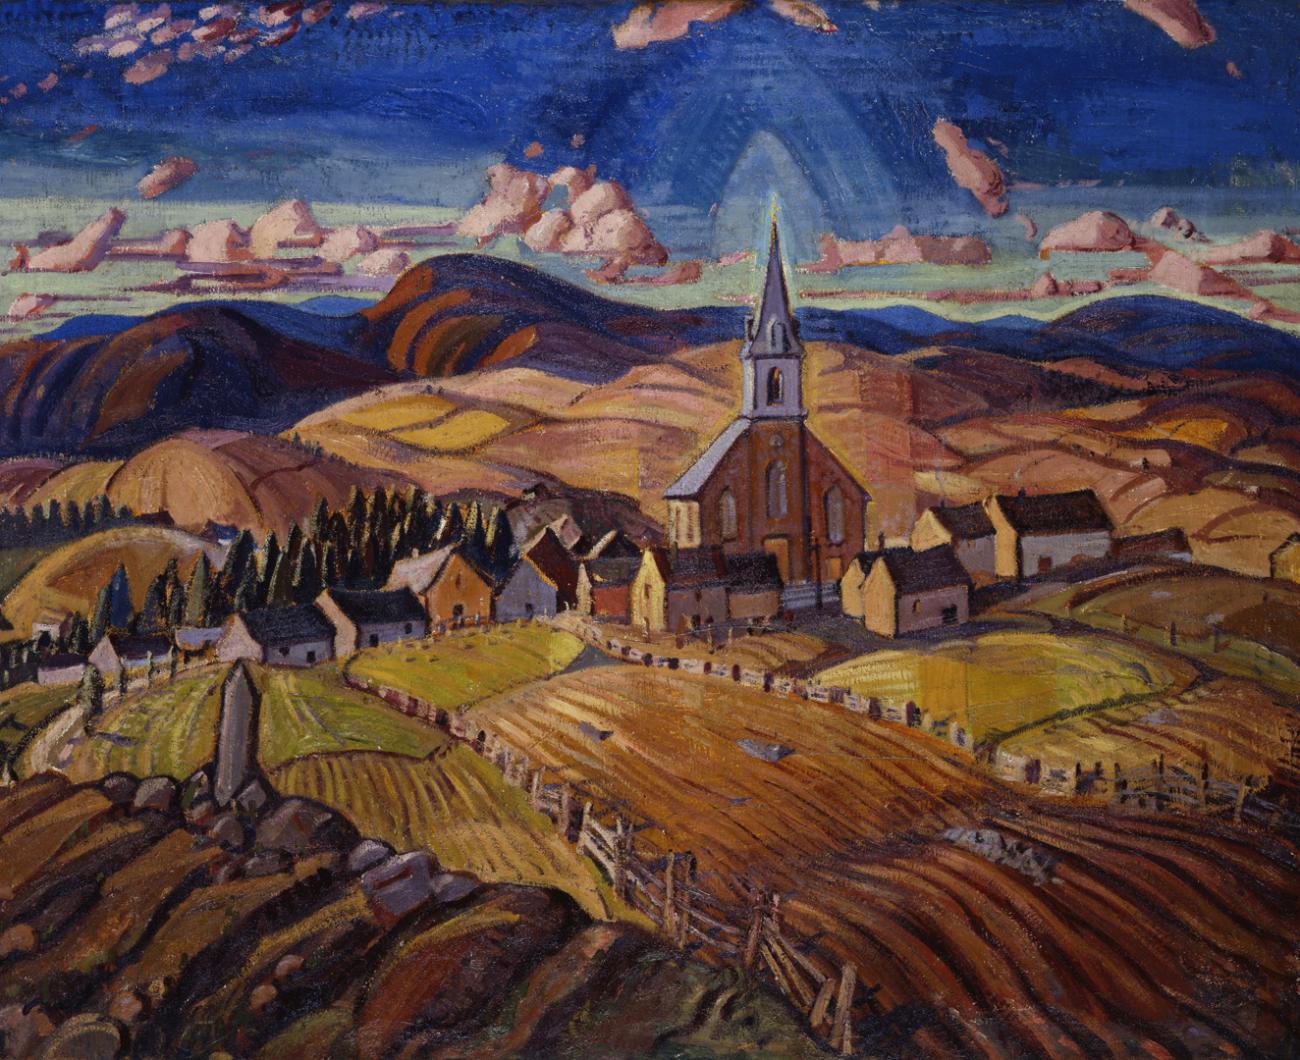 Painting of village surrounded by hills.